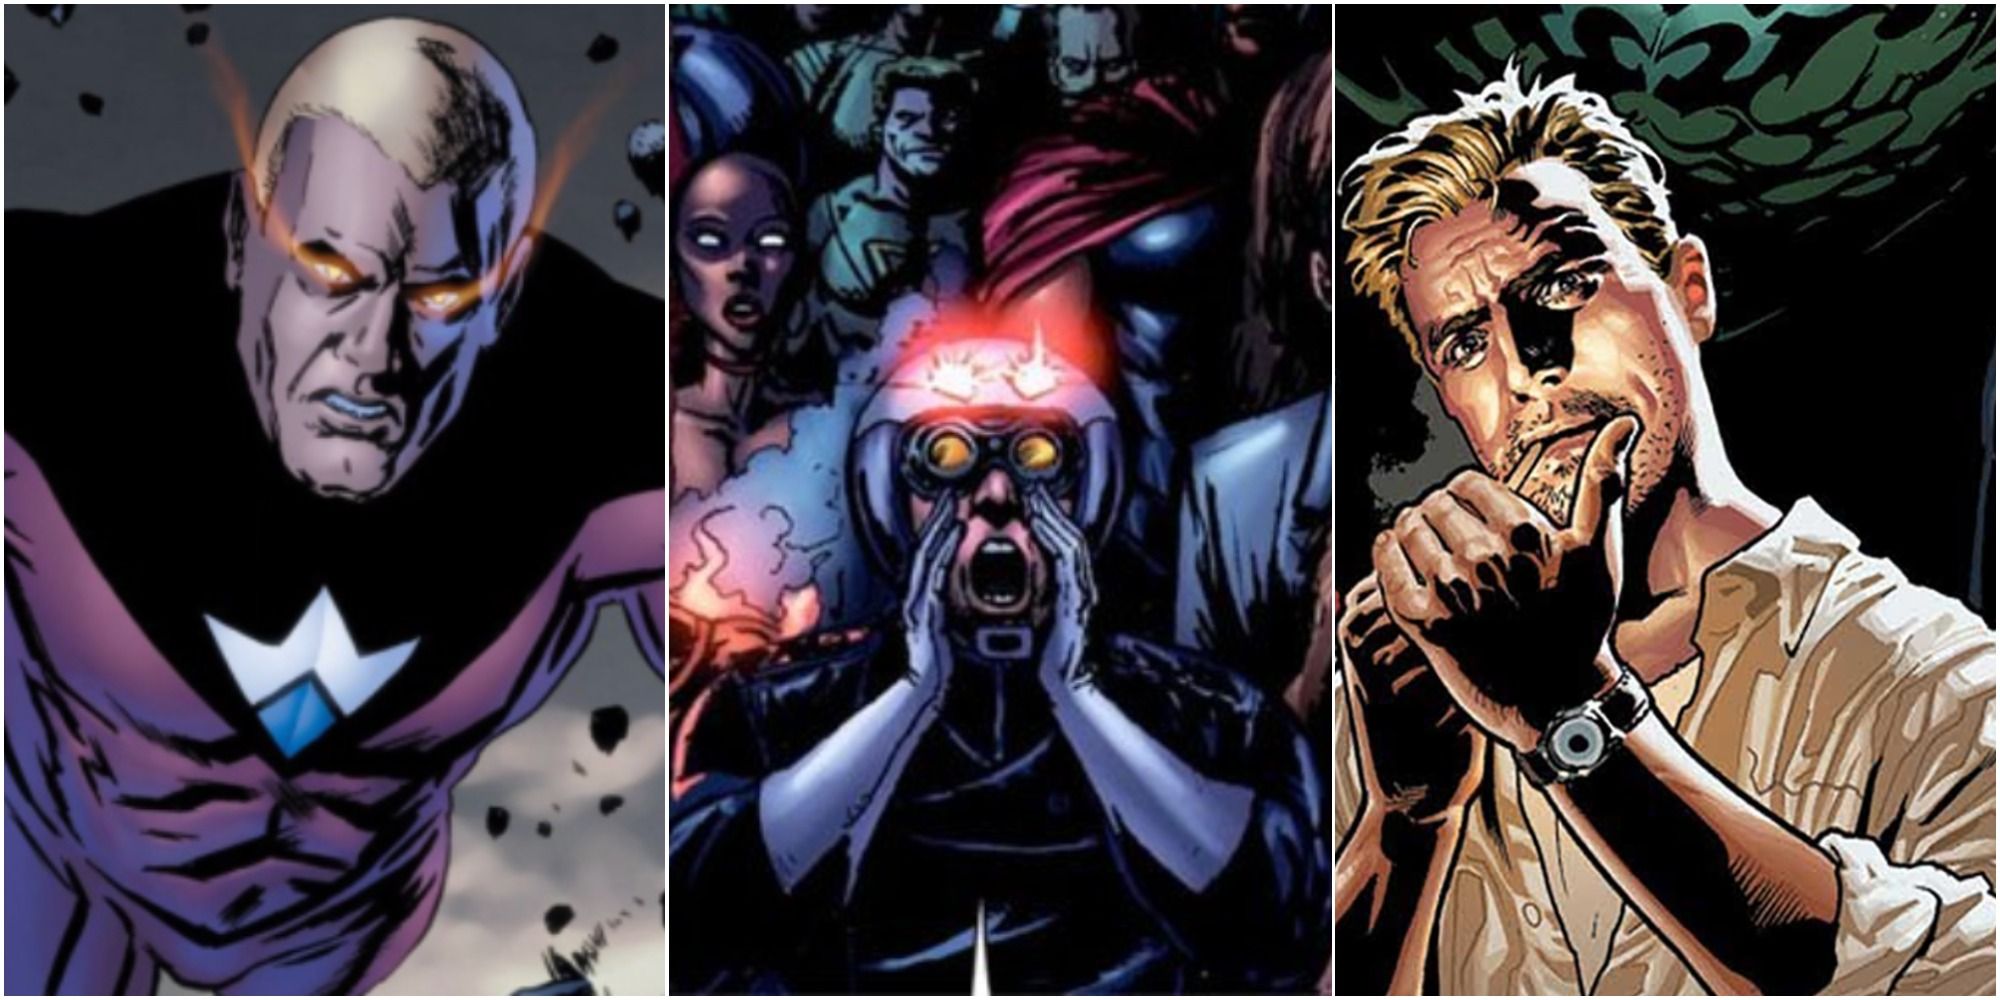 on the left is The Plutonian from Irredeemable, in the middle is Five-Oh from The Boys and on the right is John Constantine from Justice League Dark